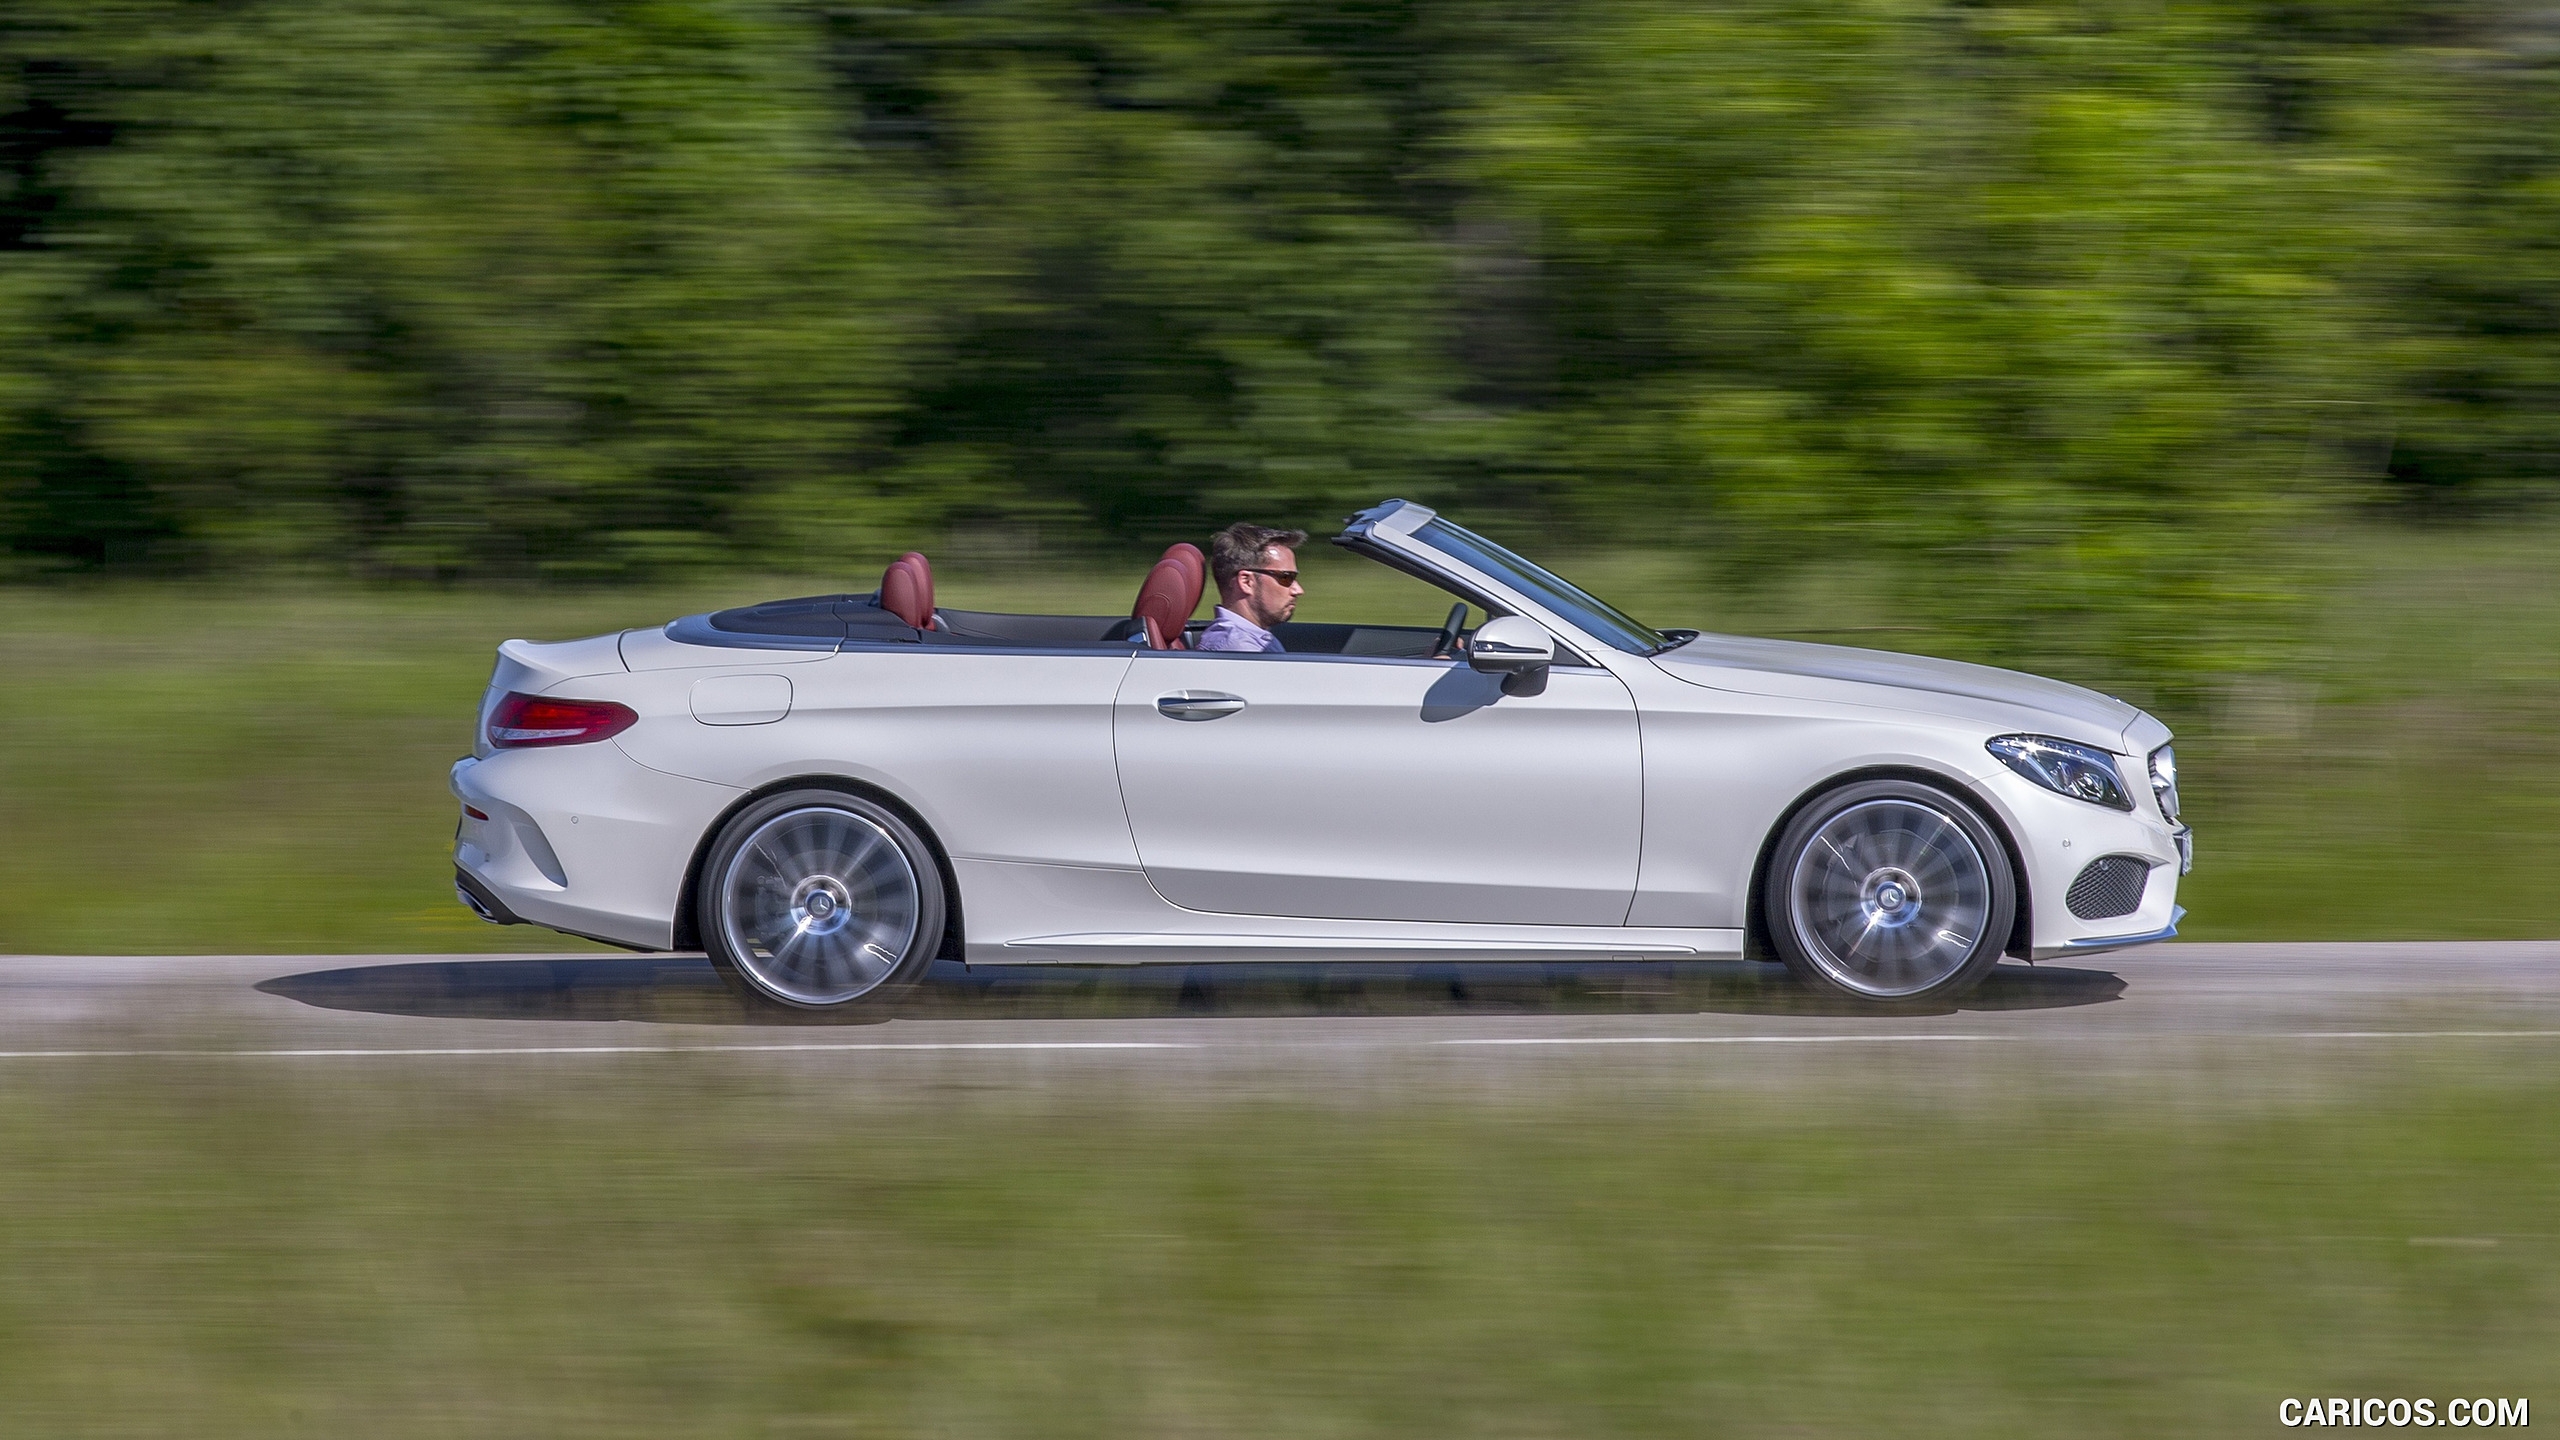 2017 Mercedes-Benz C-Class C300 Cabriolet - Side, #48 of 96